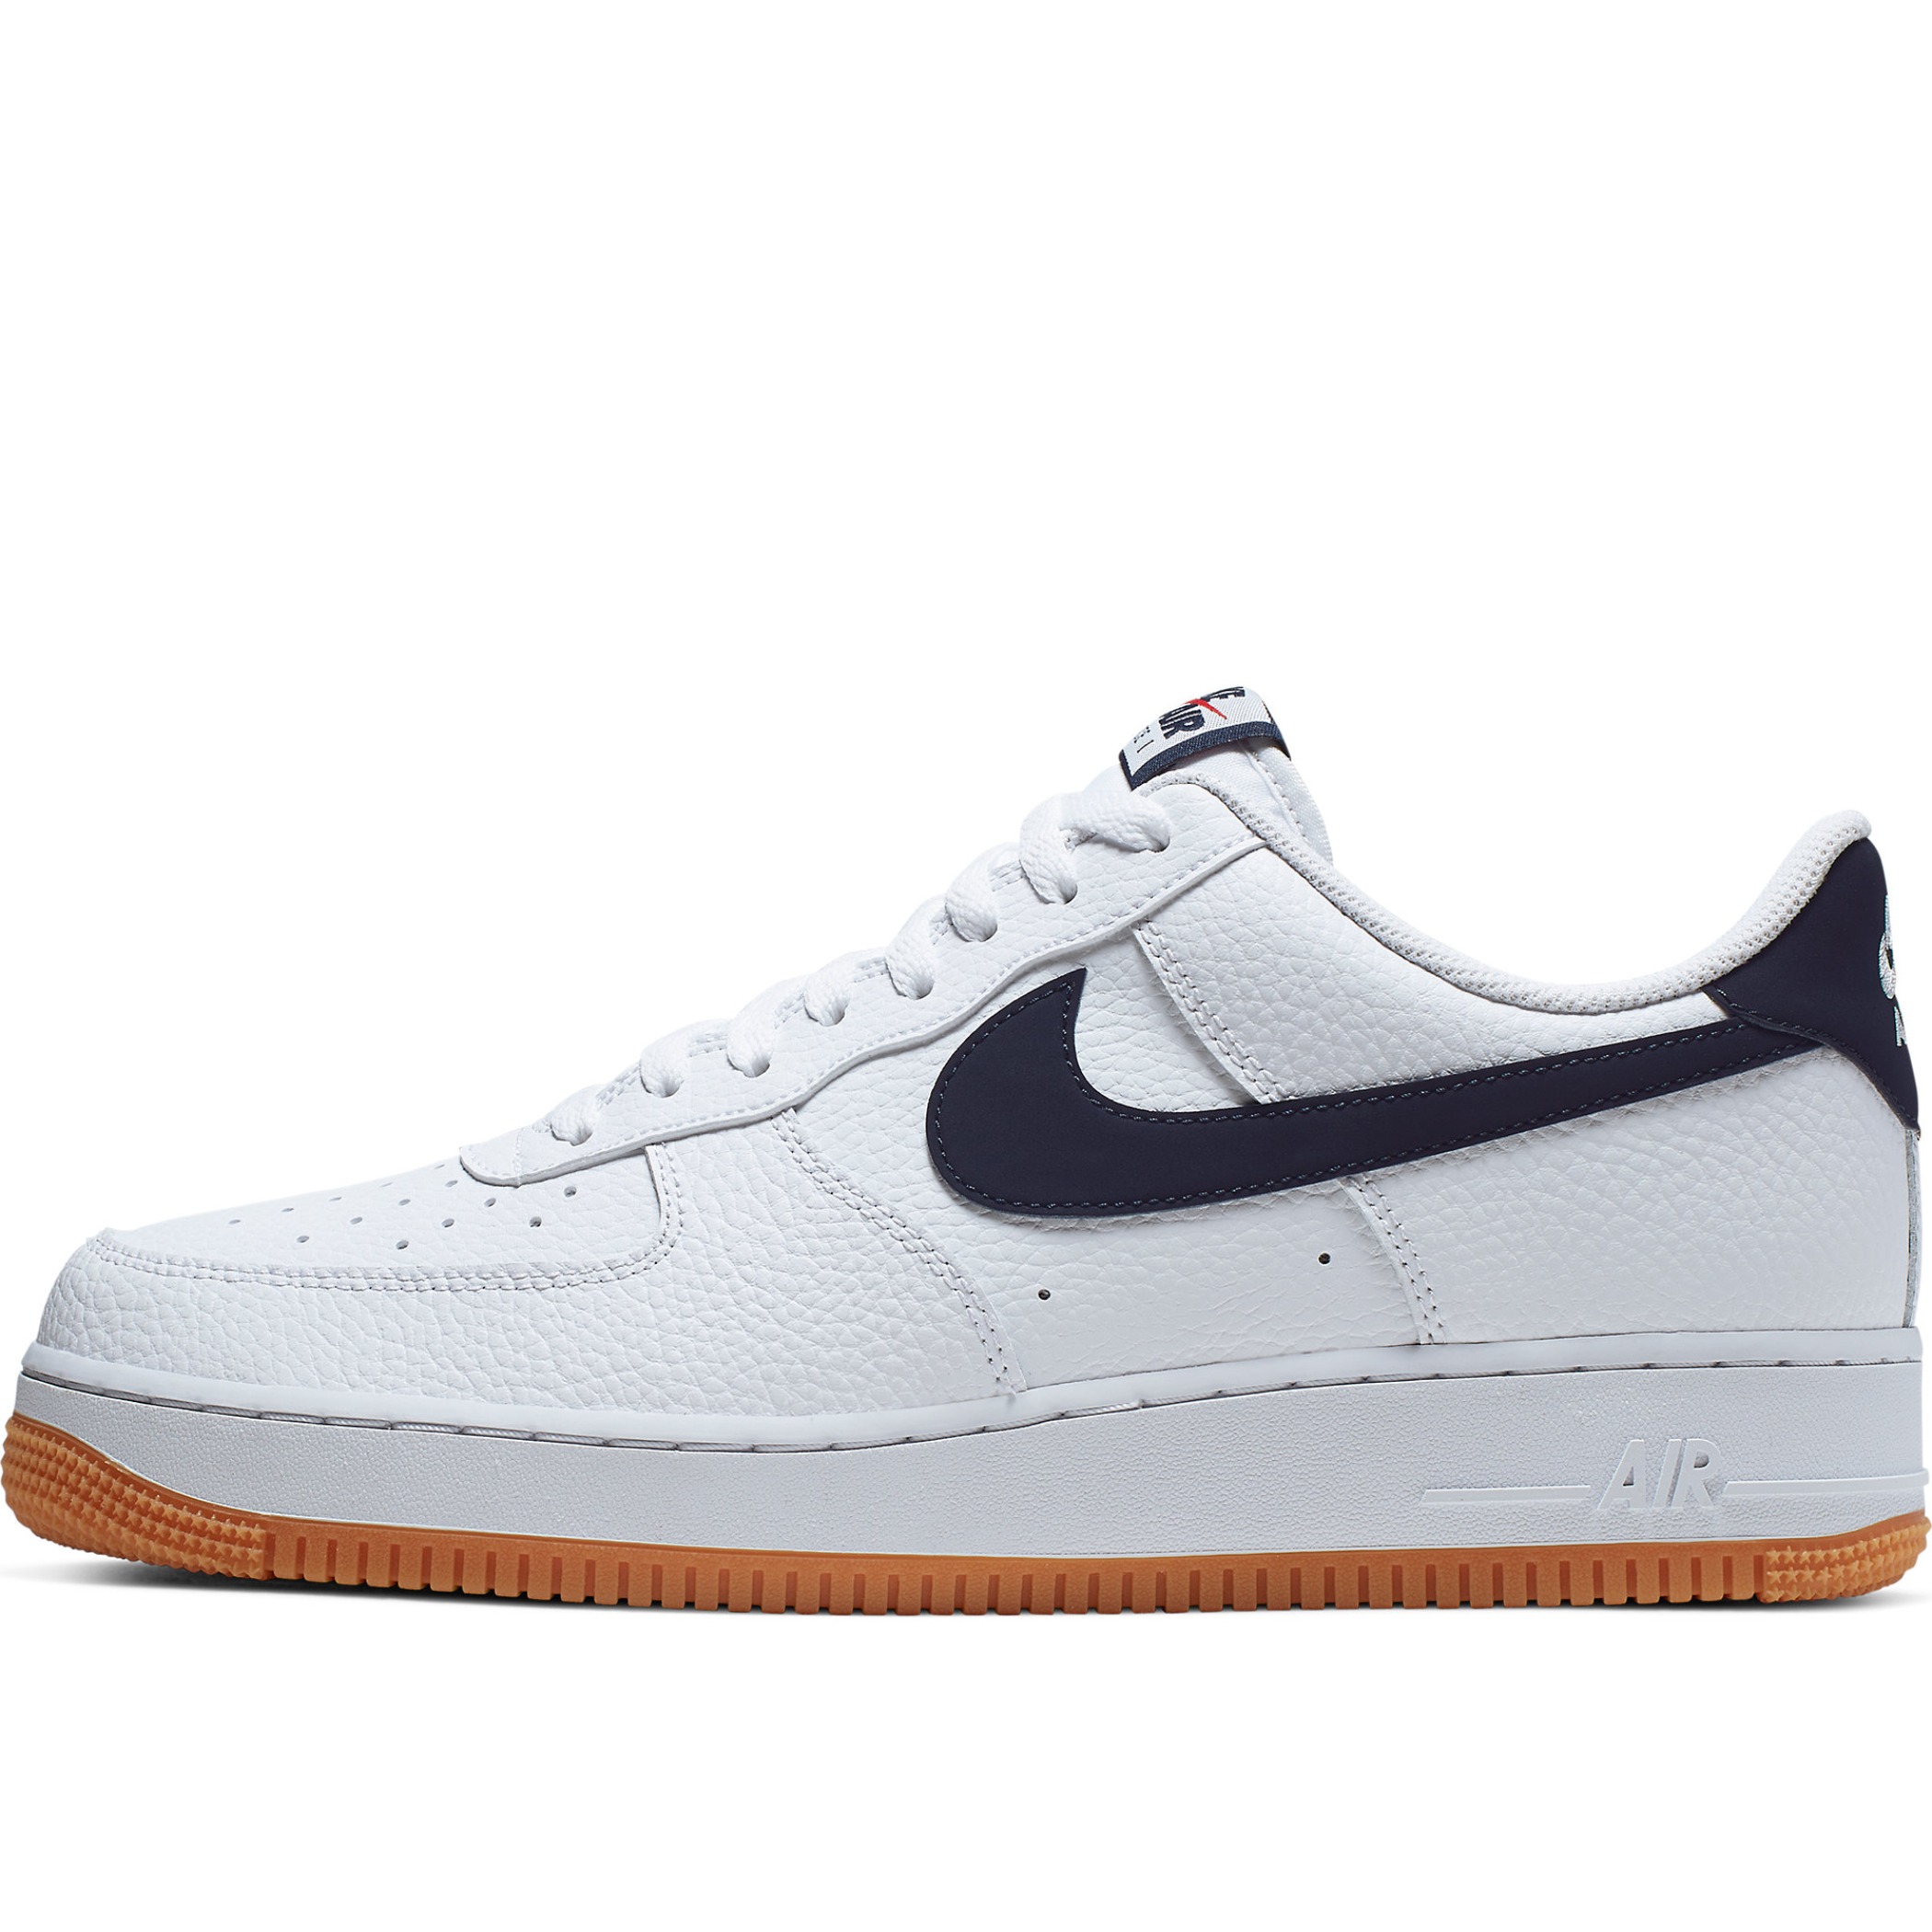 air force one white obsidian